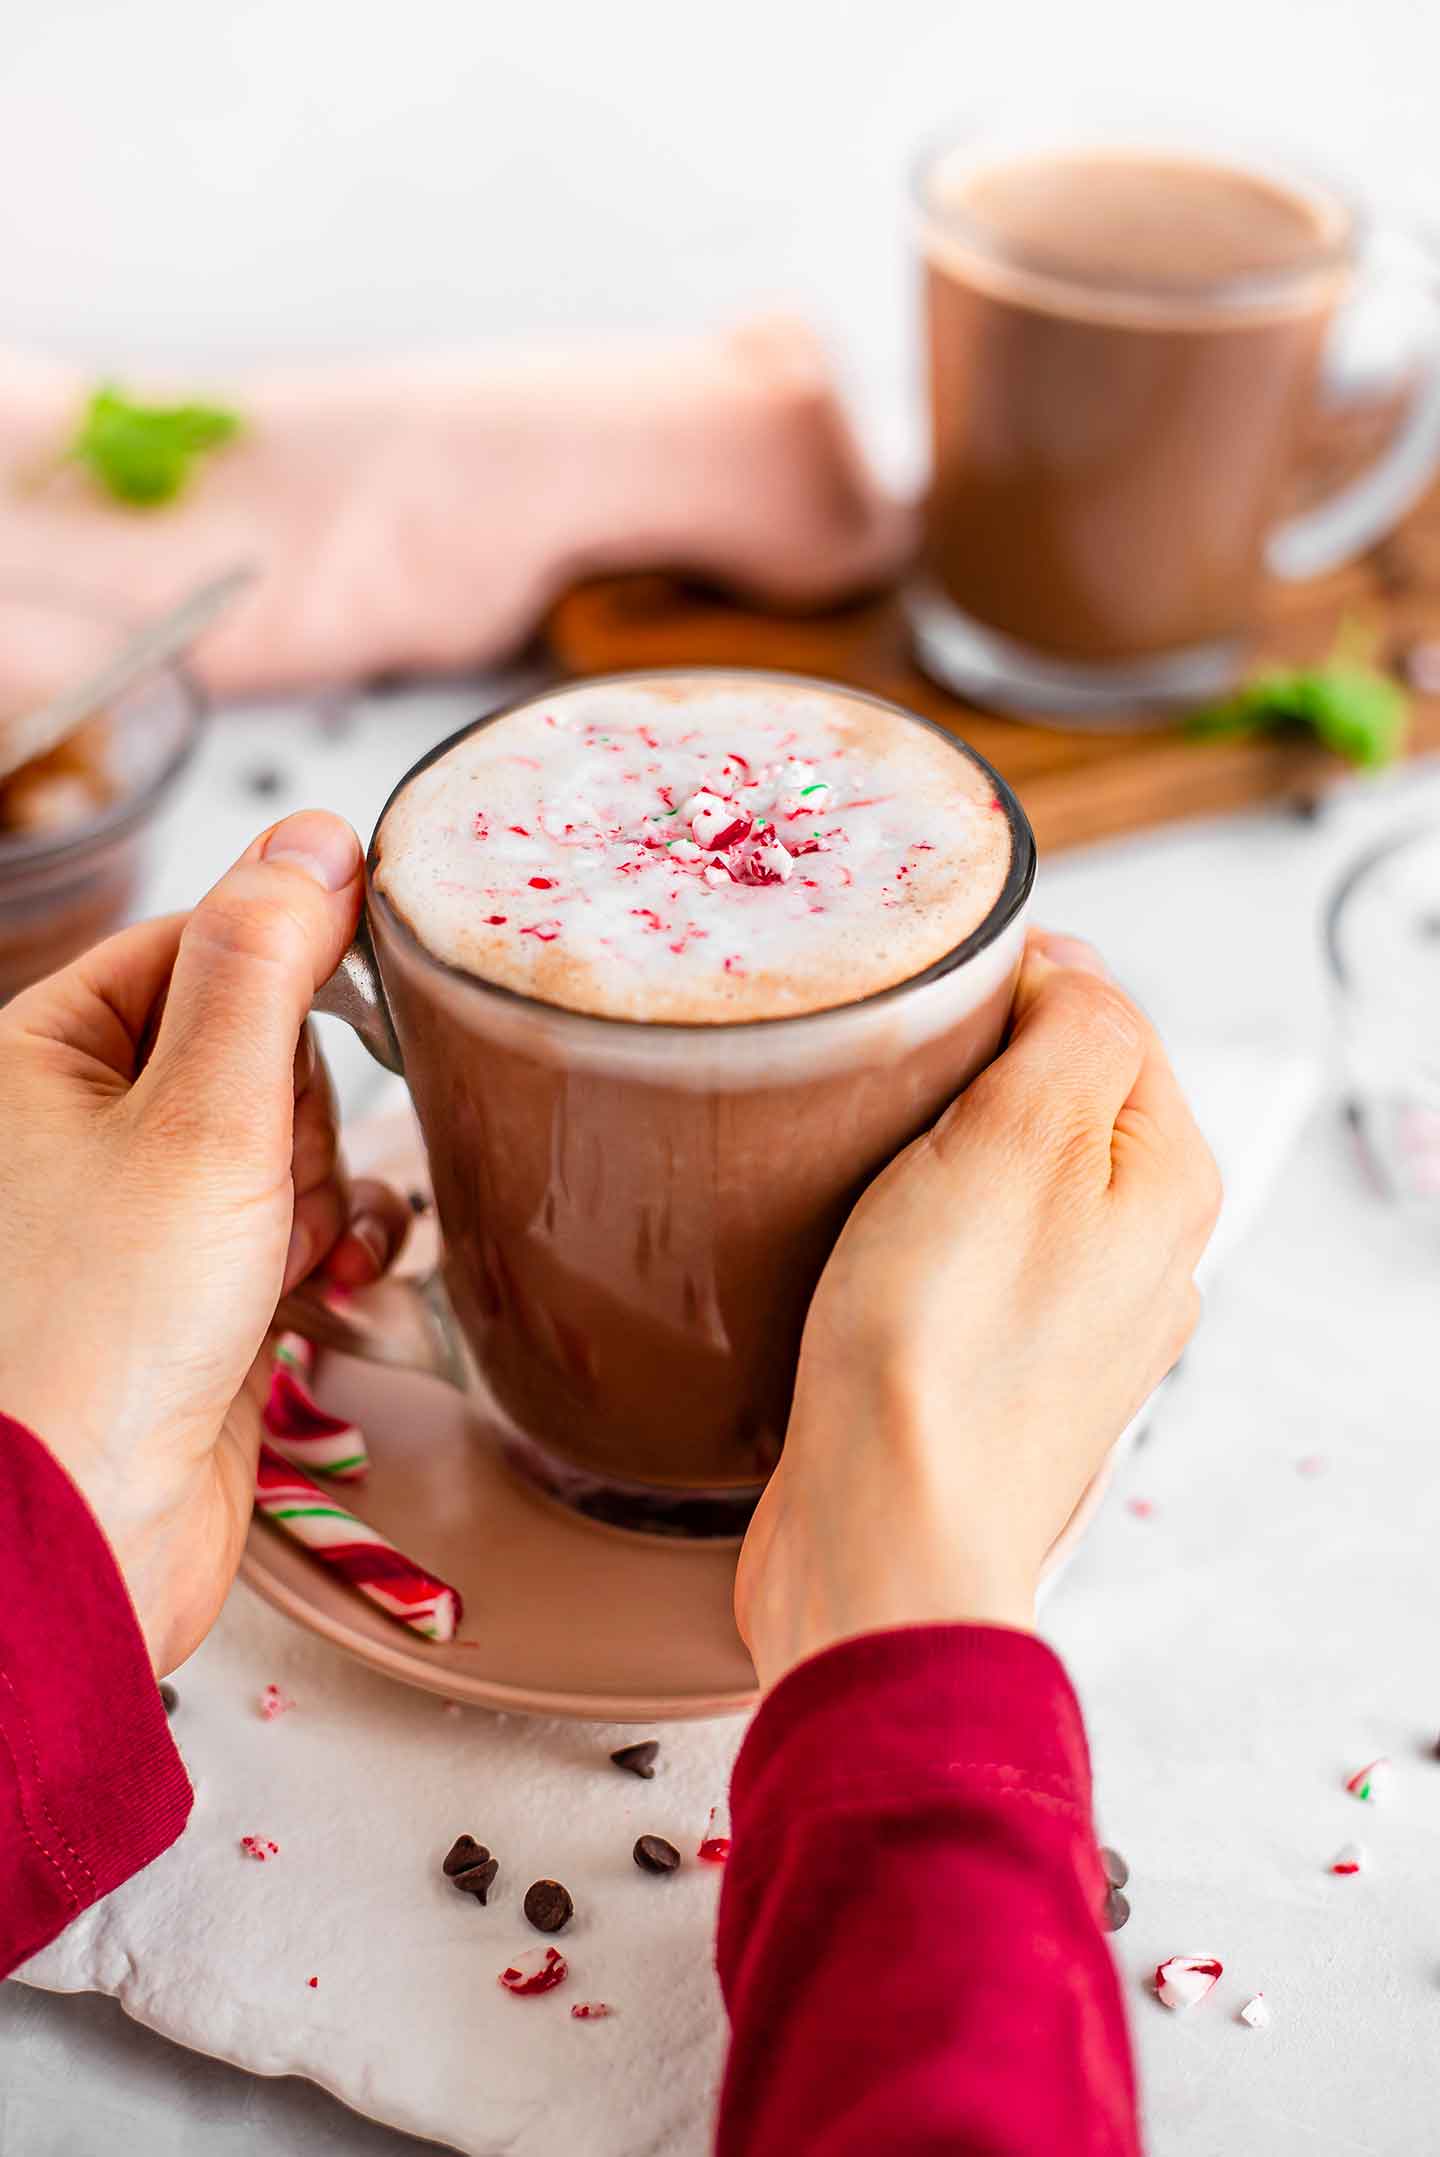 Side view of hands wrapped around a glass mug of peppermint hot chocolate. Whipped cream melts into the top of the drink and candy cane shavings sink into the whipped cream.